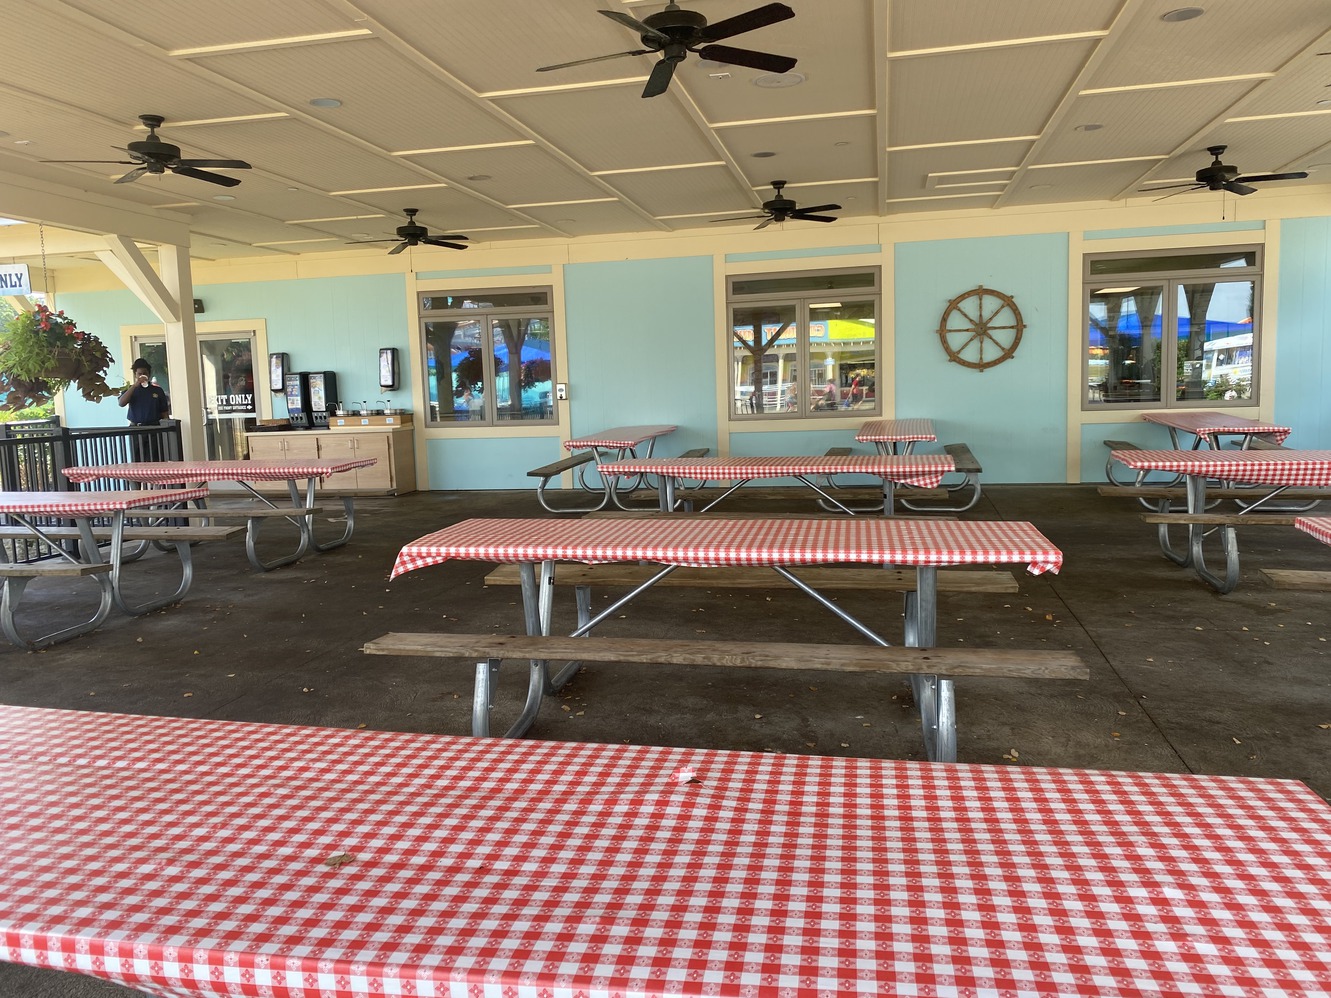 This is the main covered patio at Island Smokehouse